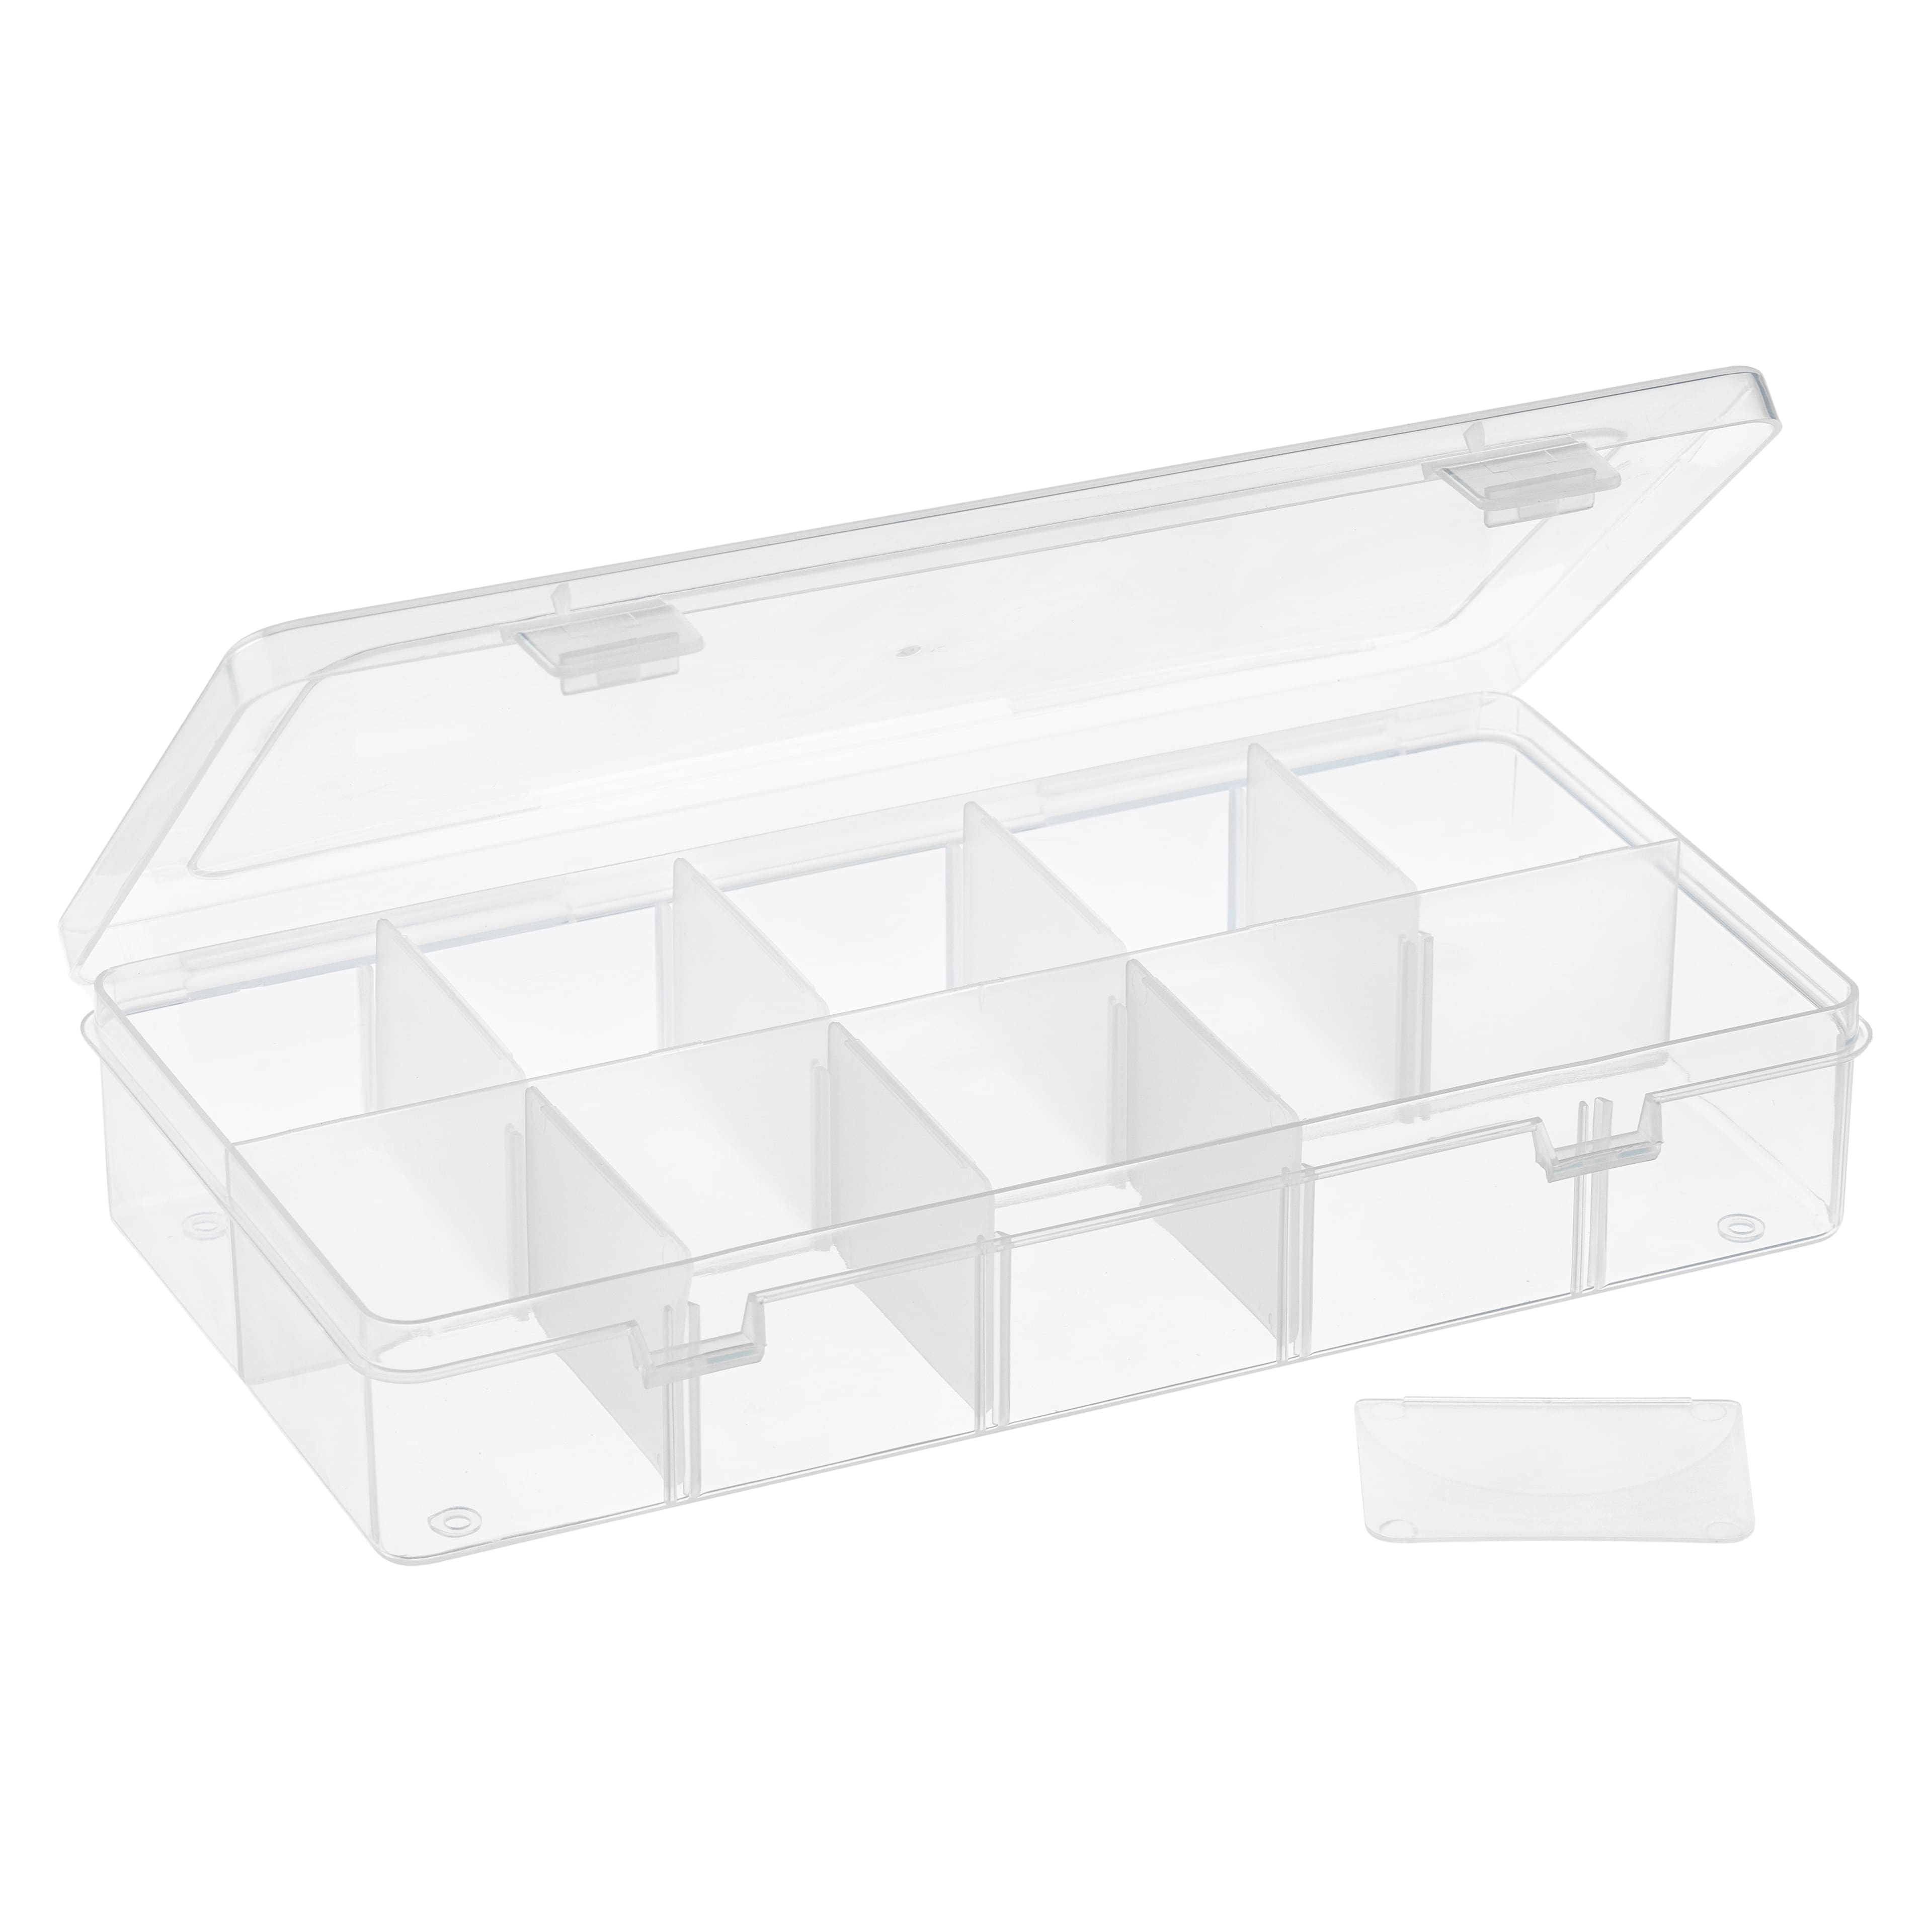 1 Plastic Bead Organizer Box, Adjustable Dividers, Sewing storage, Organizer  Container Storage Box, Dividers for bead arts and crafts